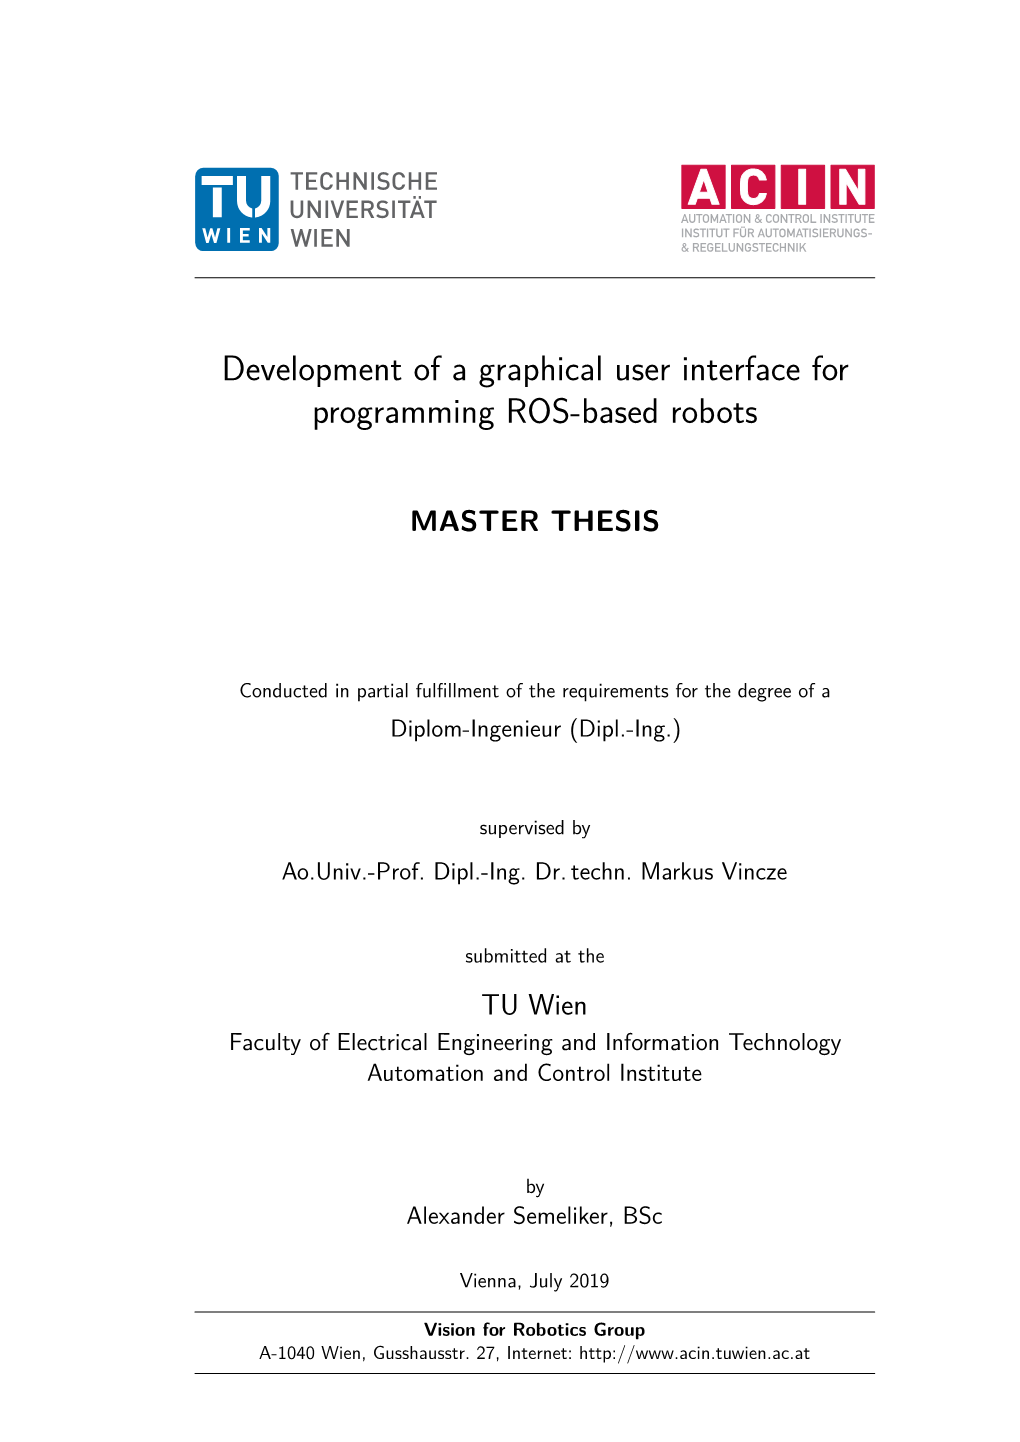 Development of a Graphical User Interface for Programming ROS-Based Robots